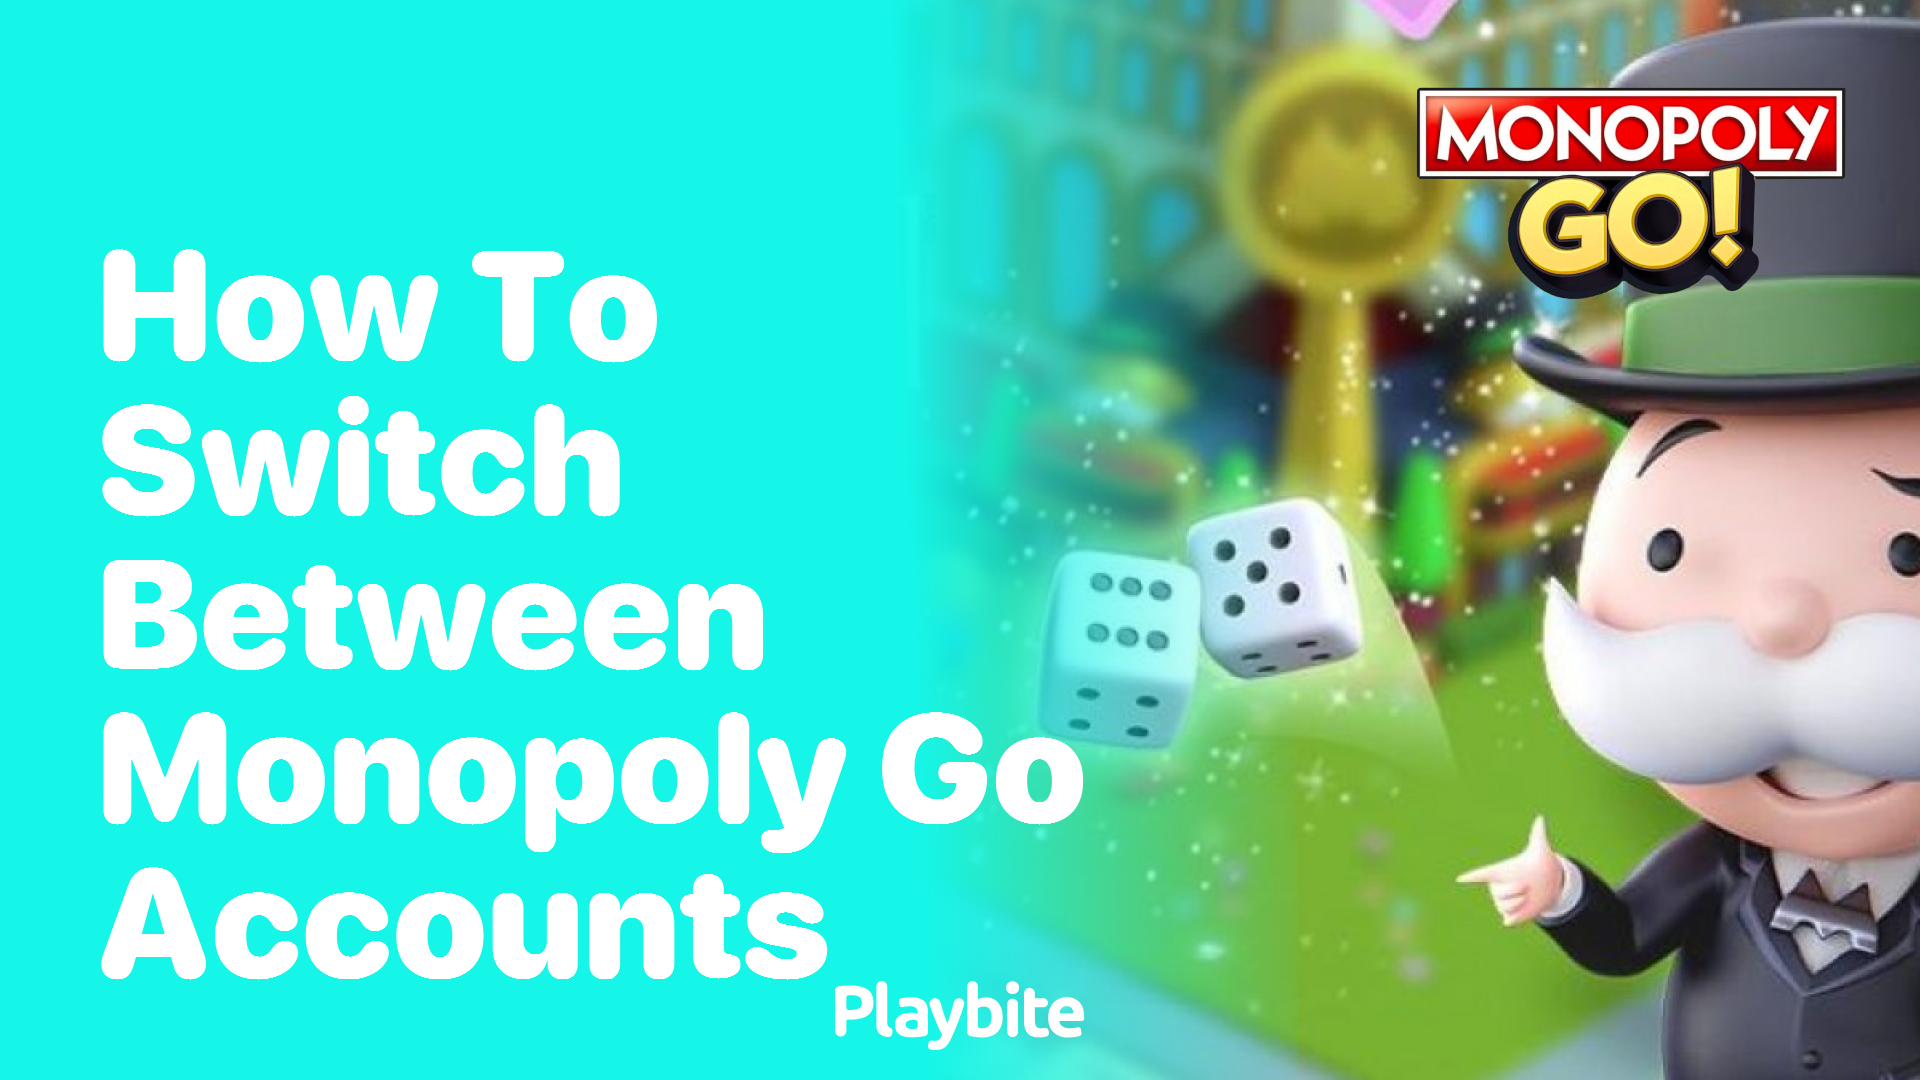 How to Switch Between Monopoly Go Accounts